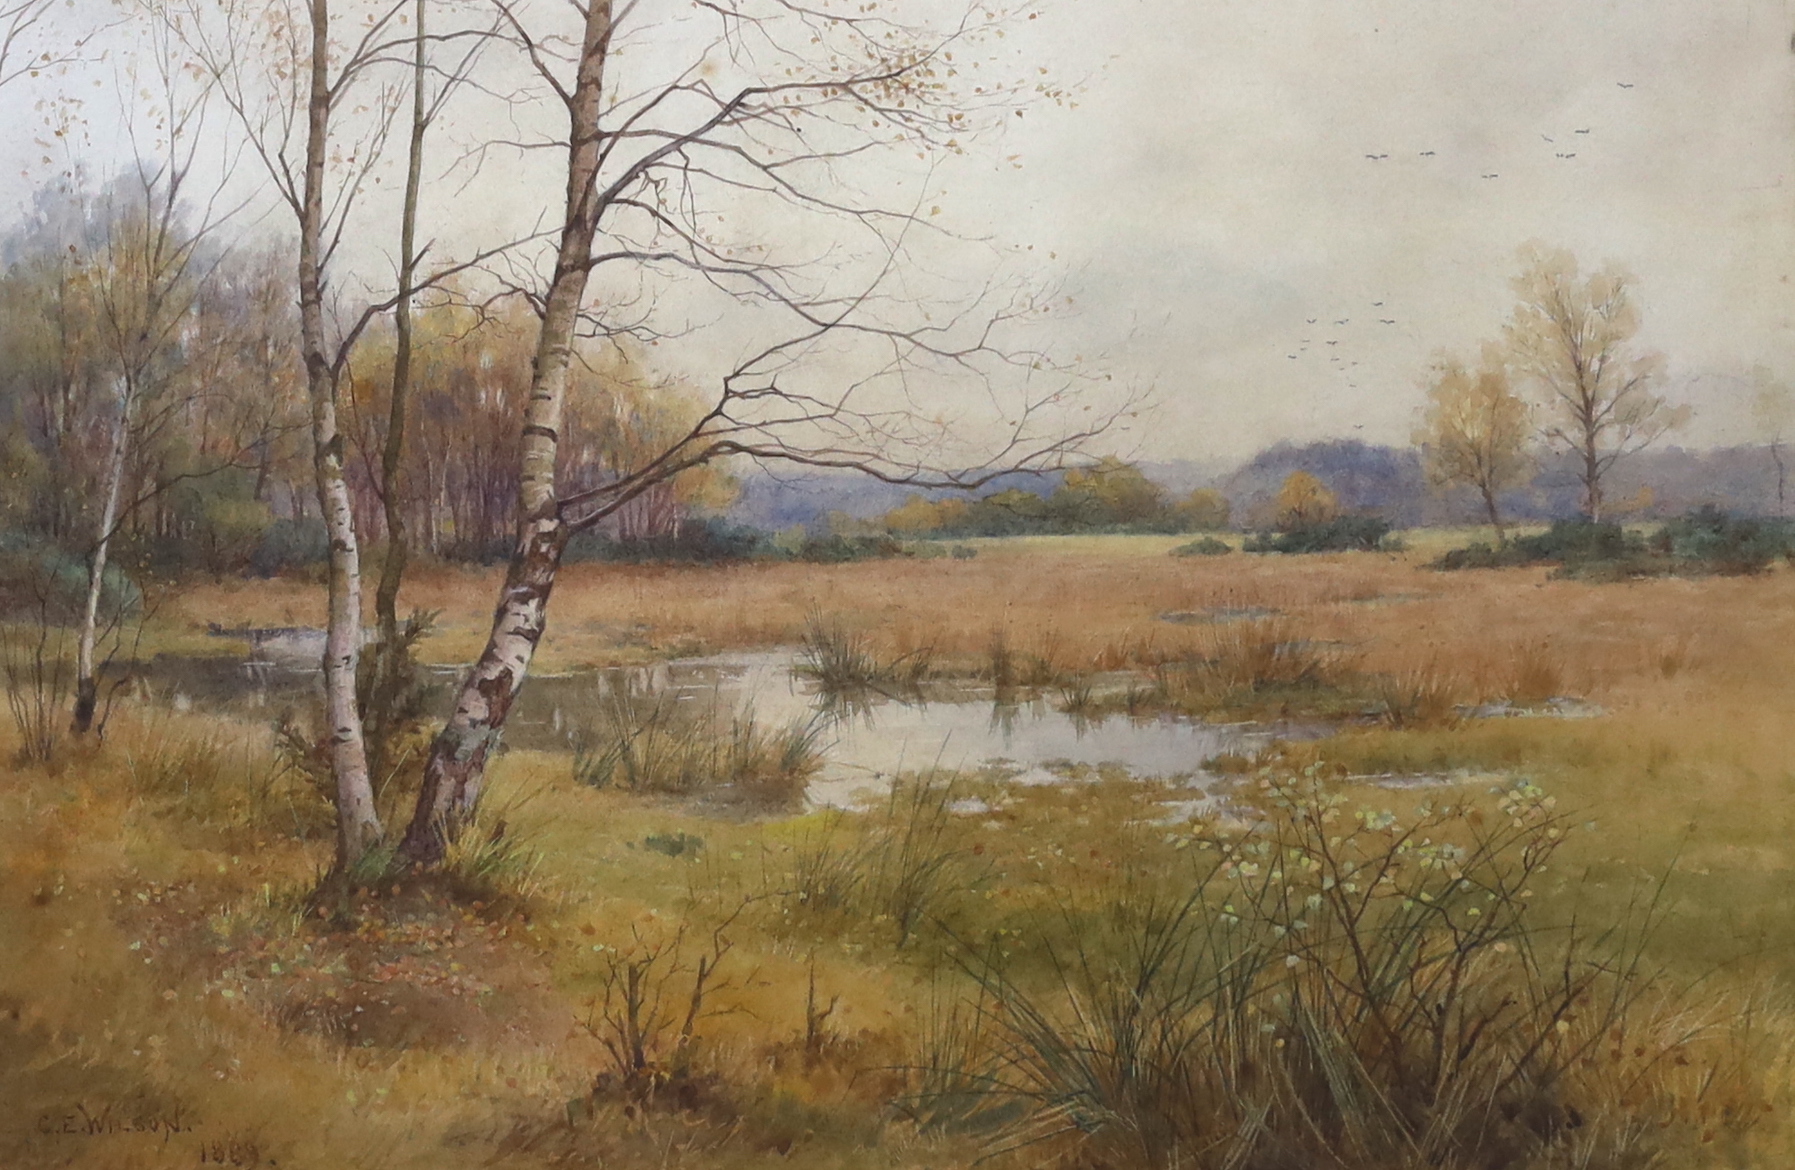 Charles Edward Wilson (1854-1941), watercolour, Landscape with birch trees, signed and dated 1889, 32 x 48cm